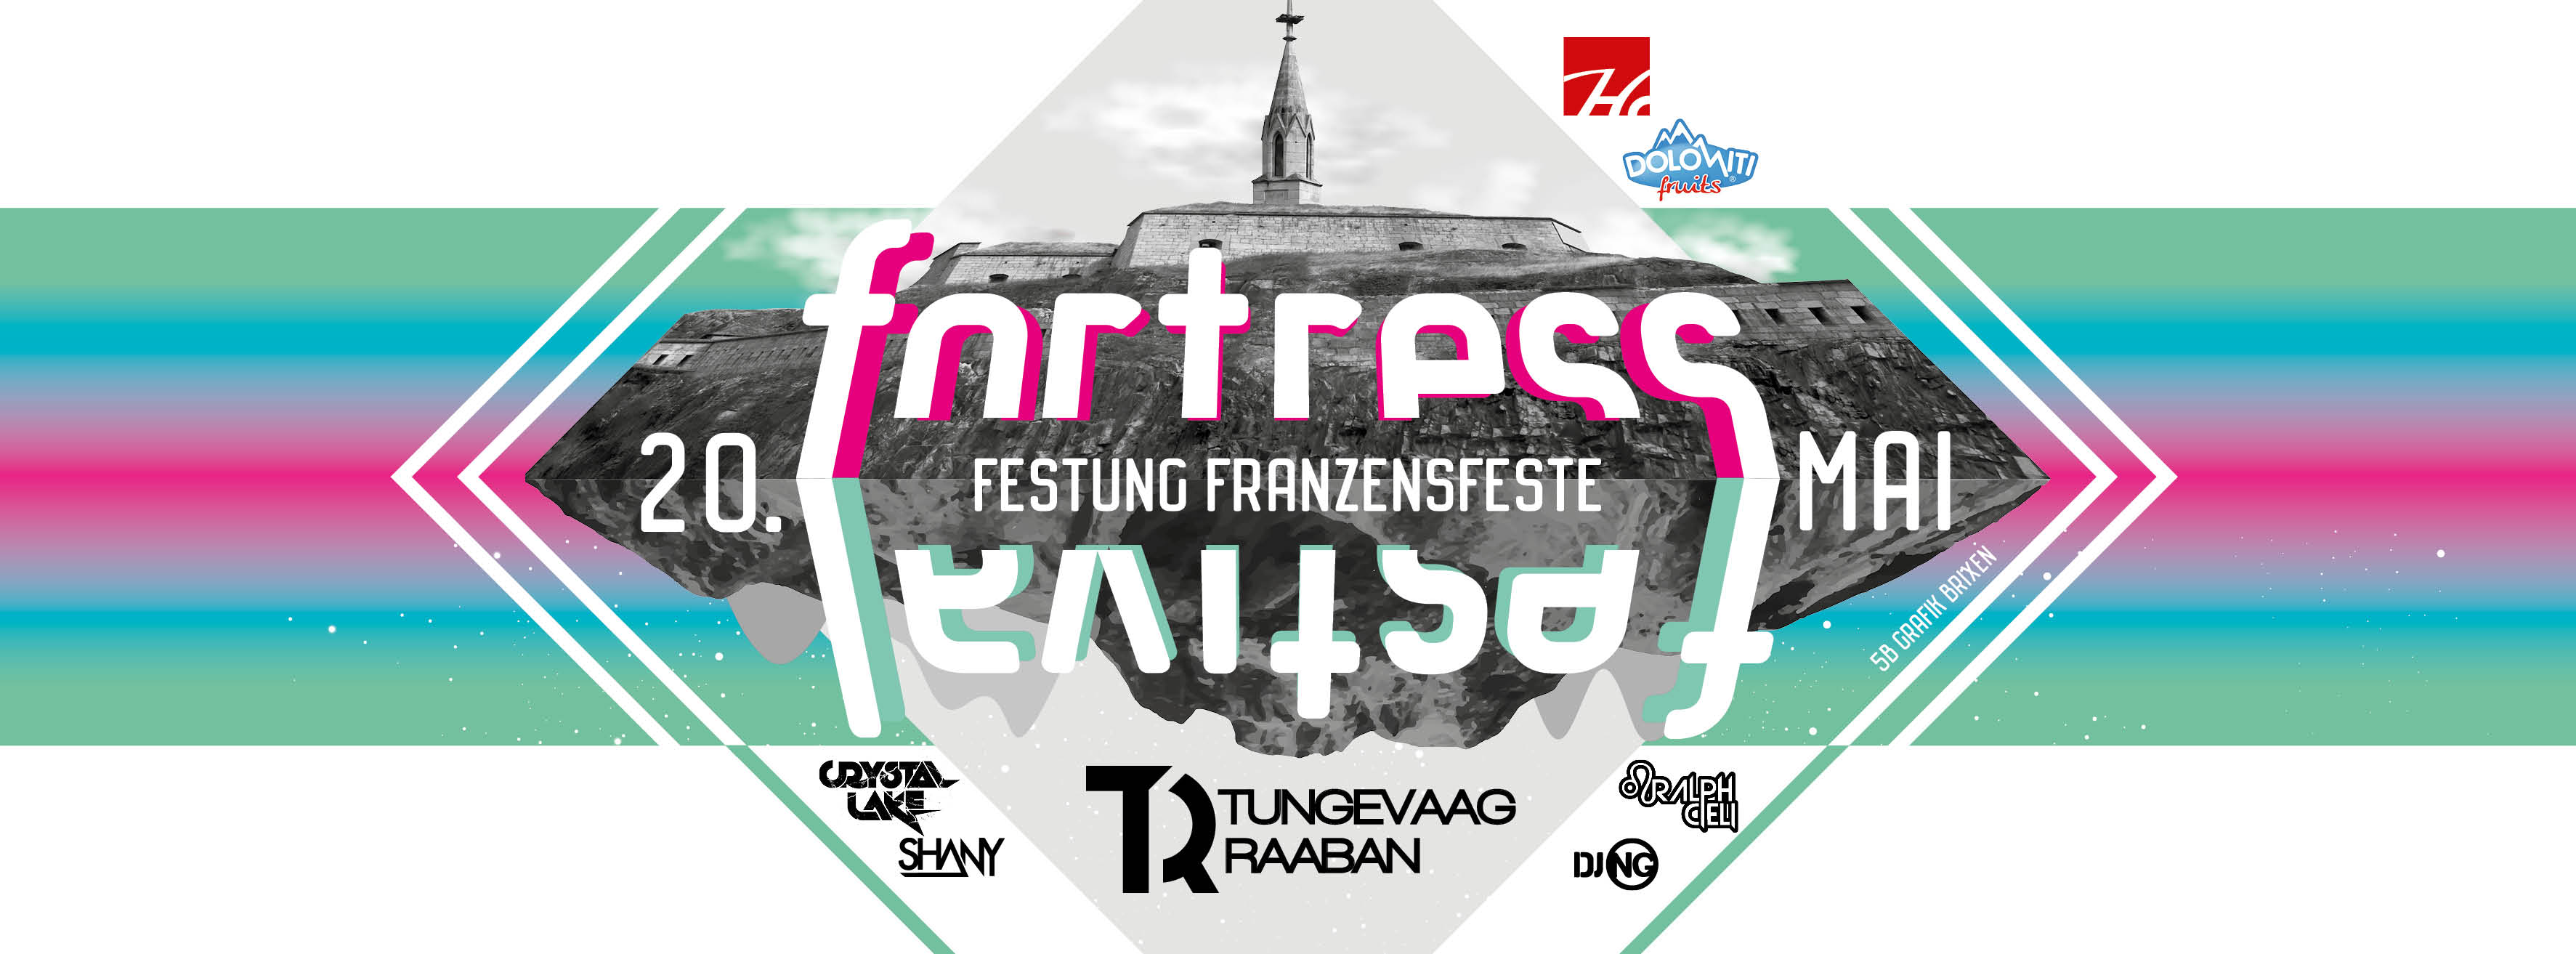 The Fortress Festival